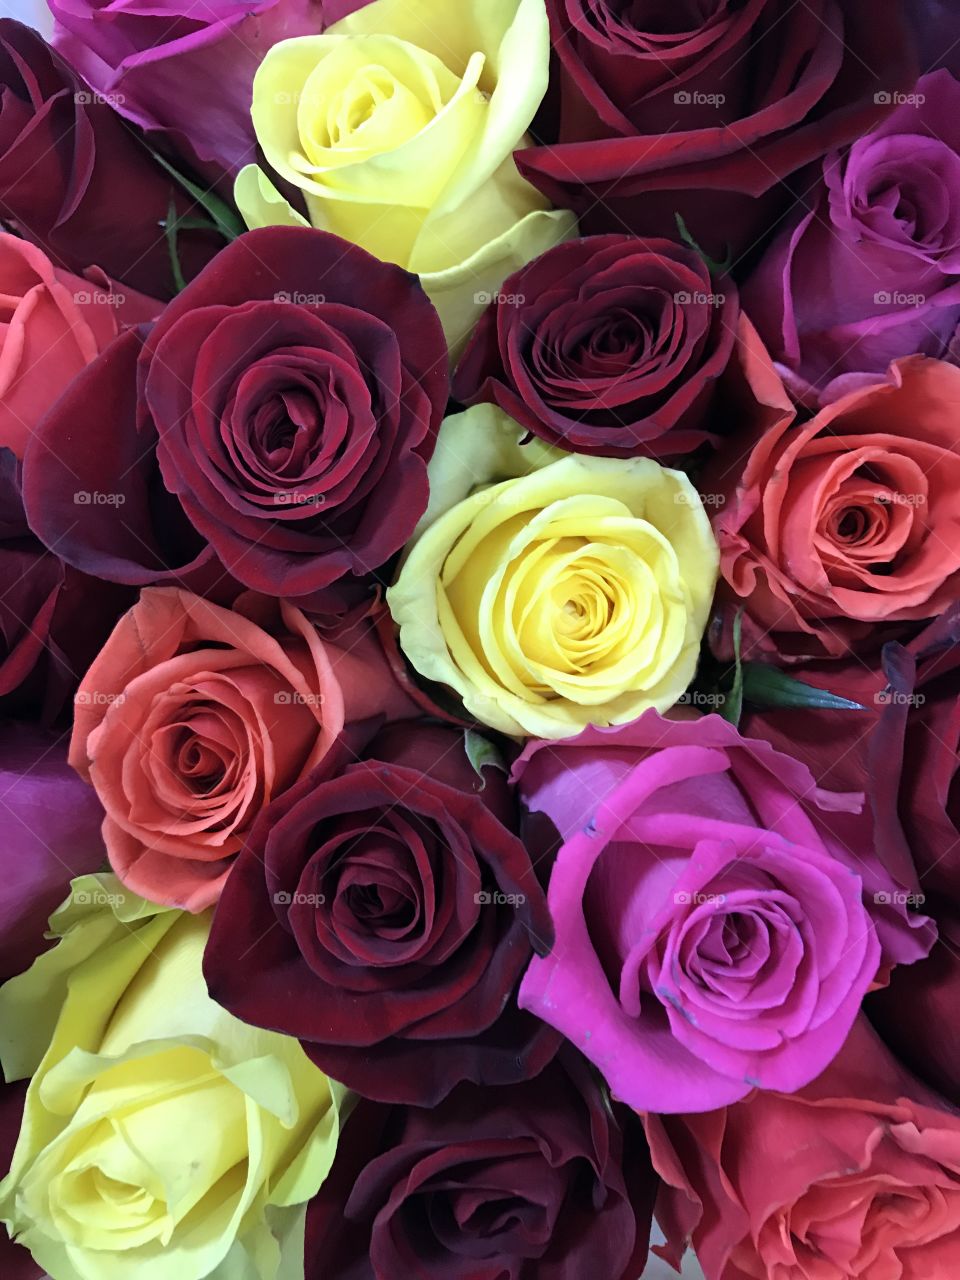 Roses are...